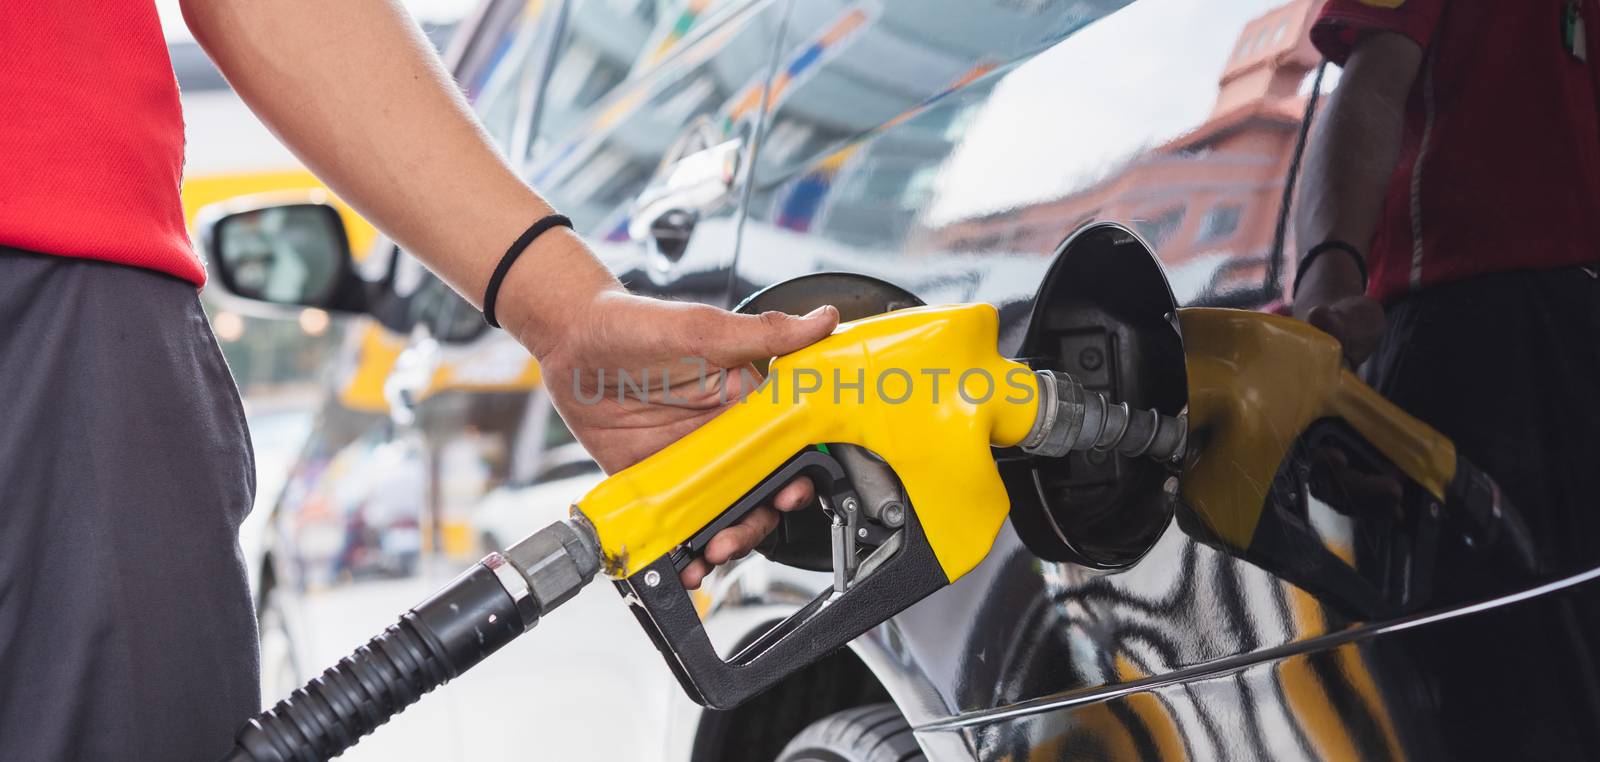 Staff in uniform hand holding gun refueling gasoline vehicle car at gas filling station